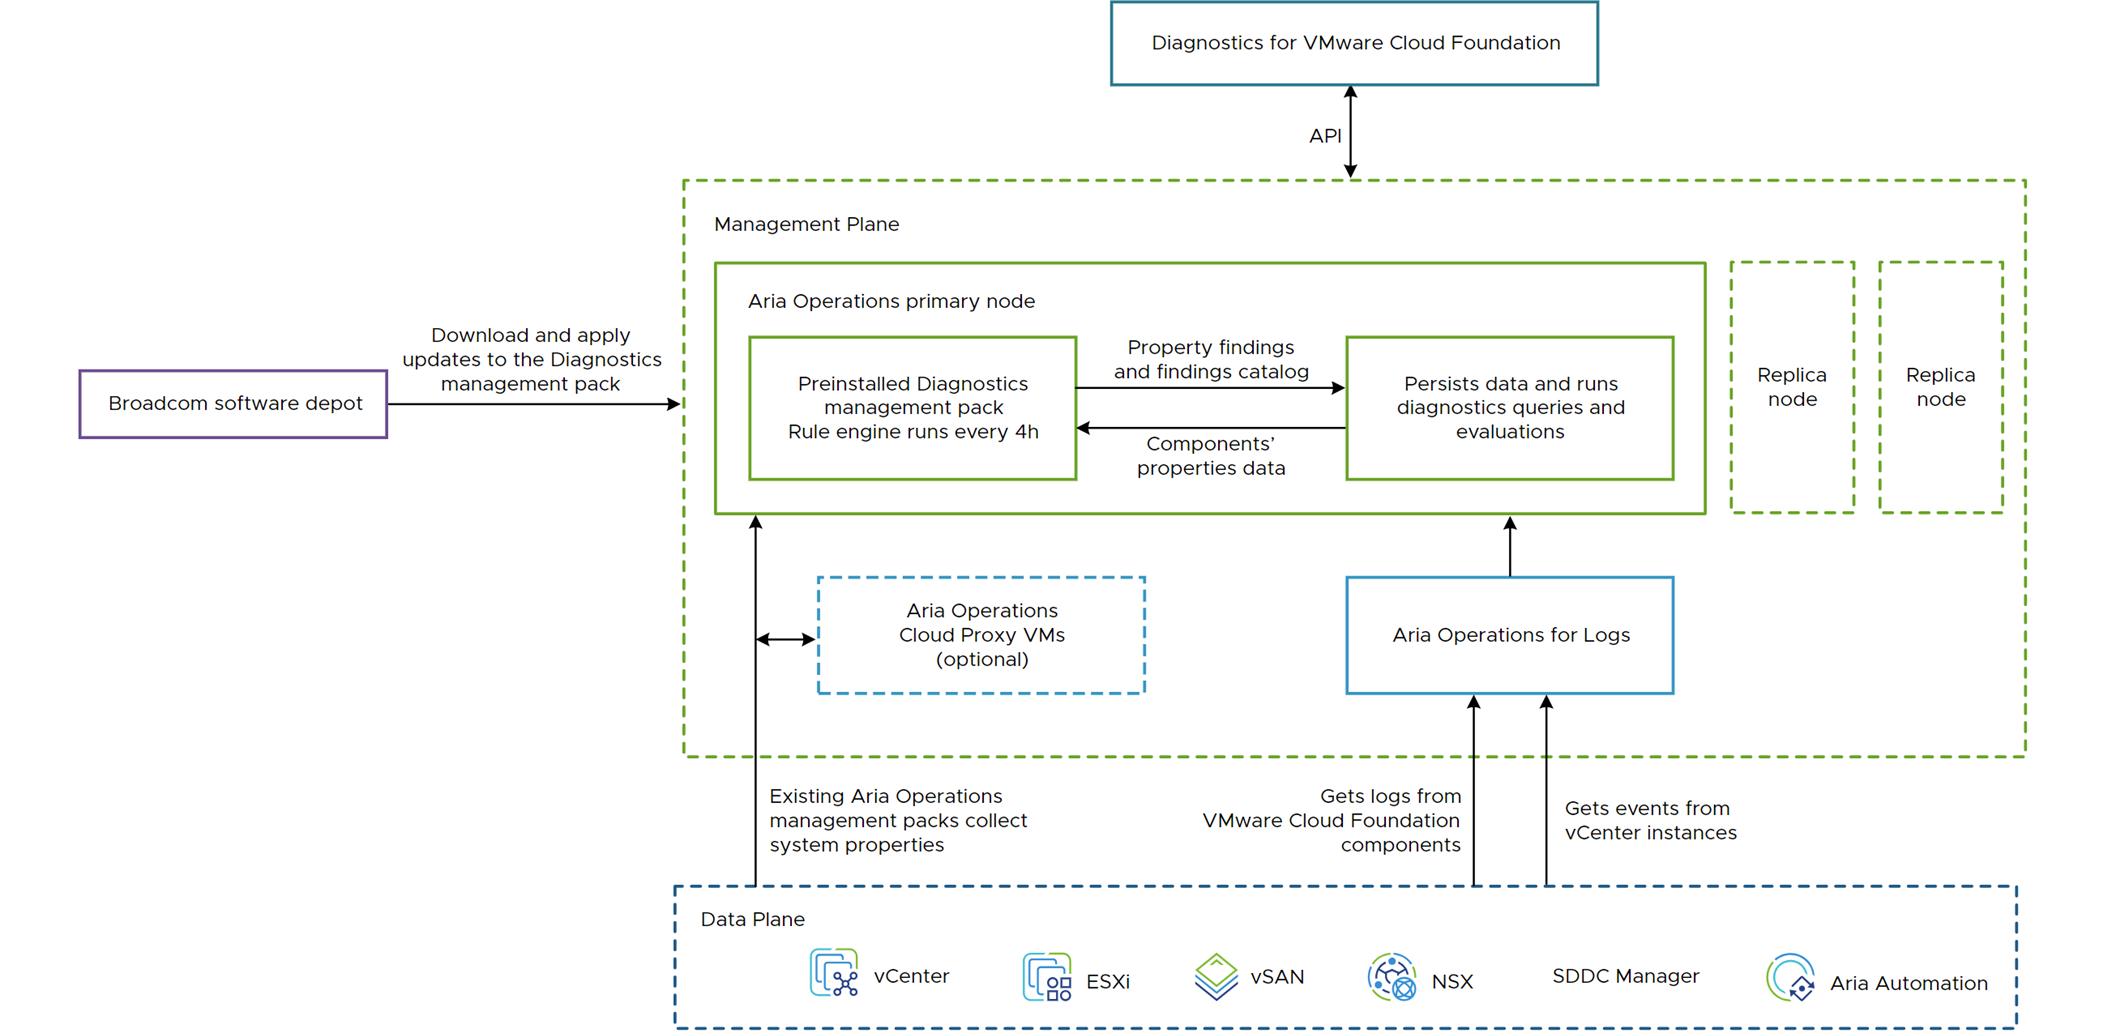 Architecture Diagram and Data Flow of Diagnostics for VMware Cloud Foundation